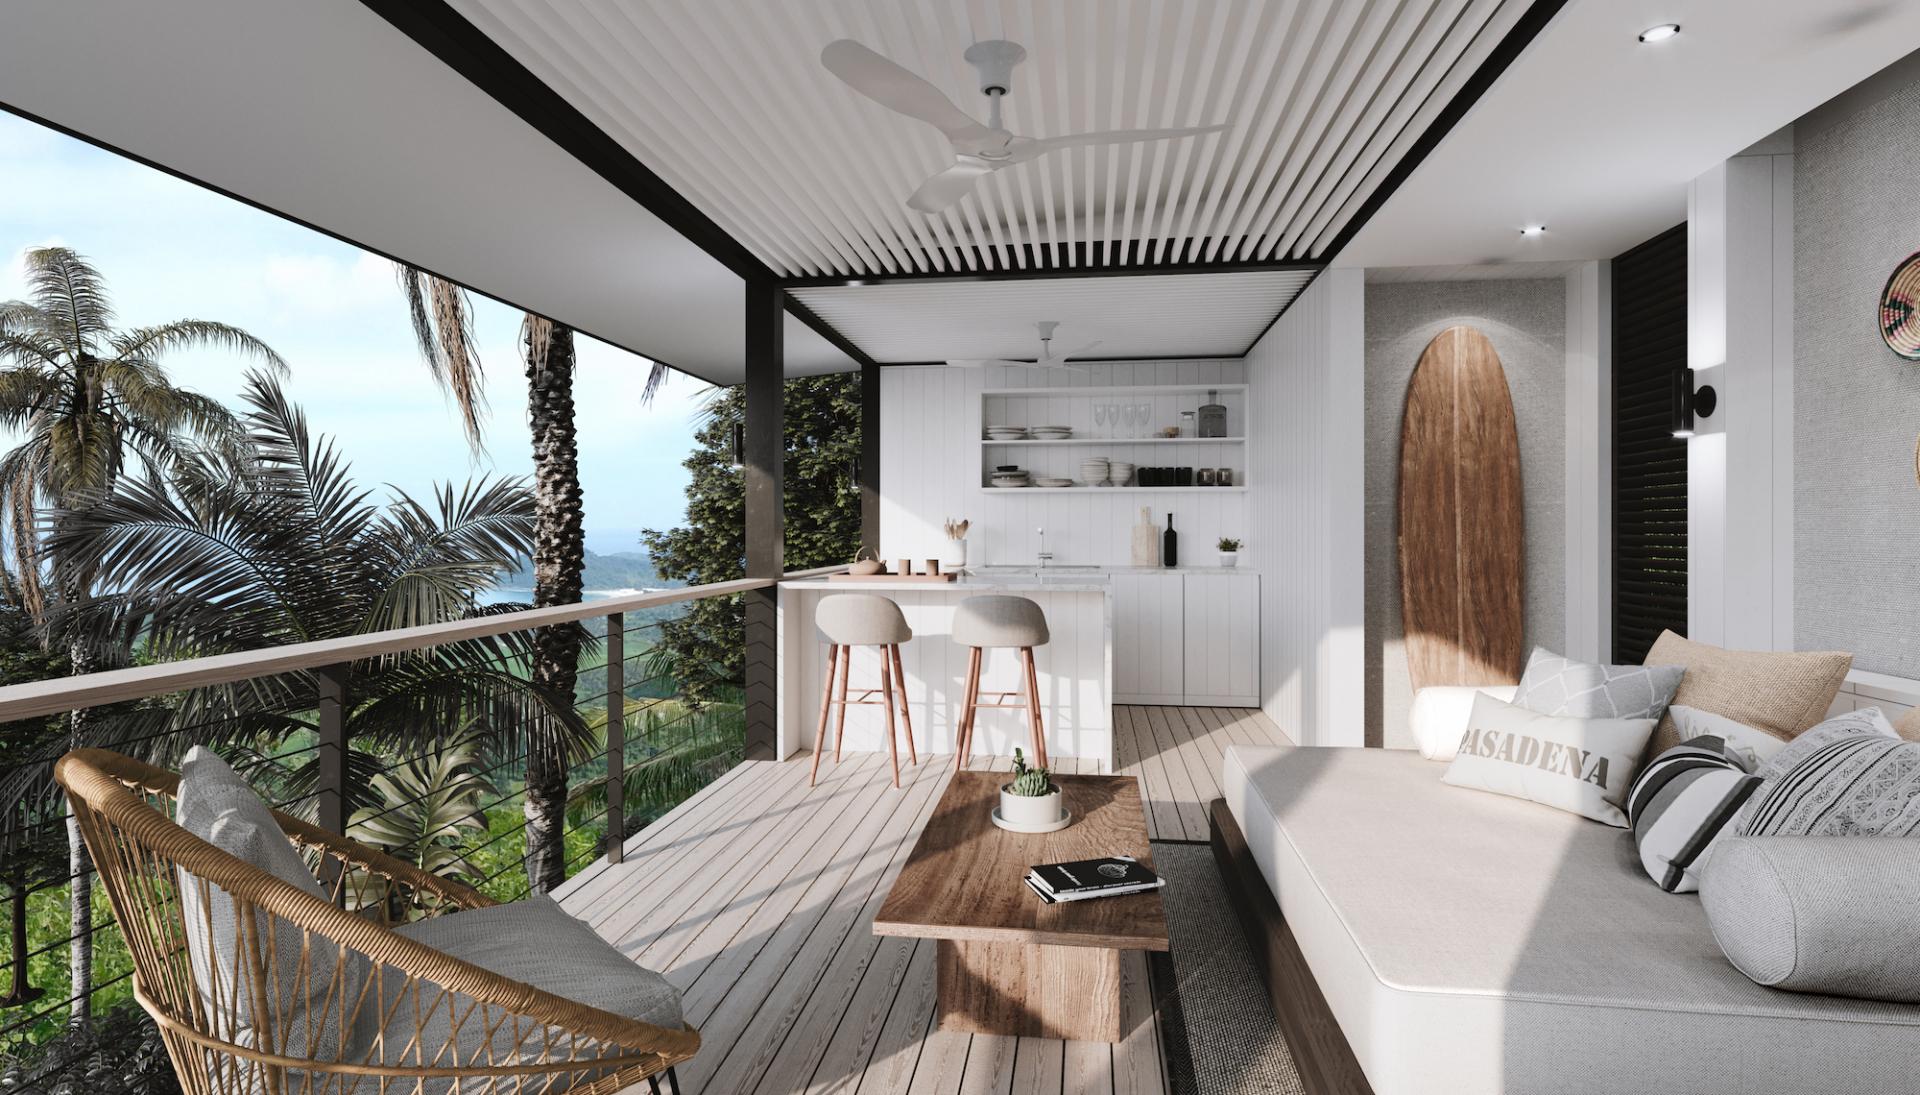 Precrafted Villa: Coastal Getaway That Combines Luxury With The Beauty of Nature